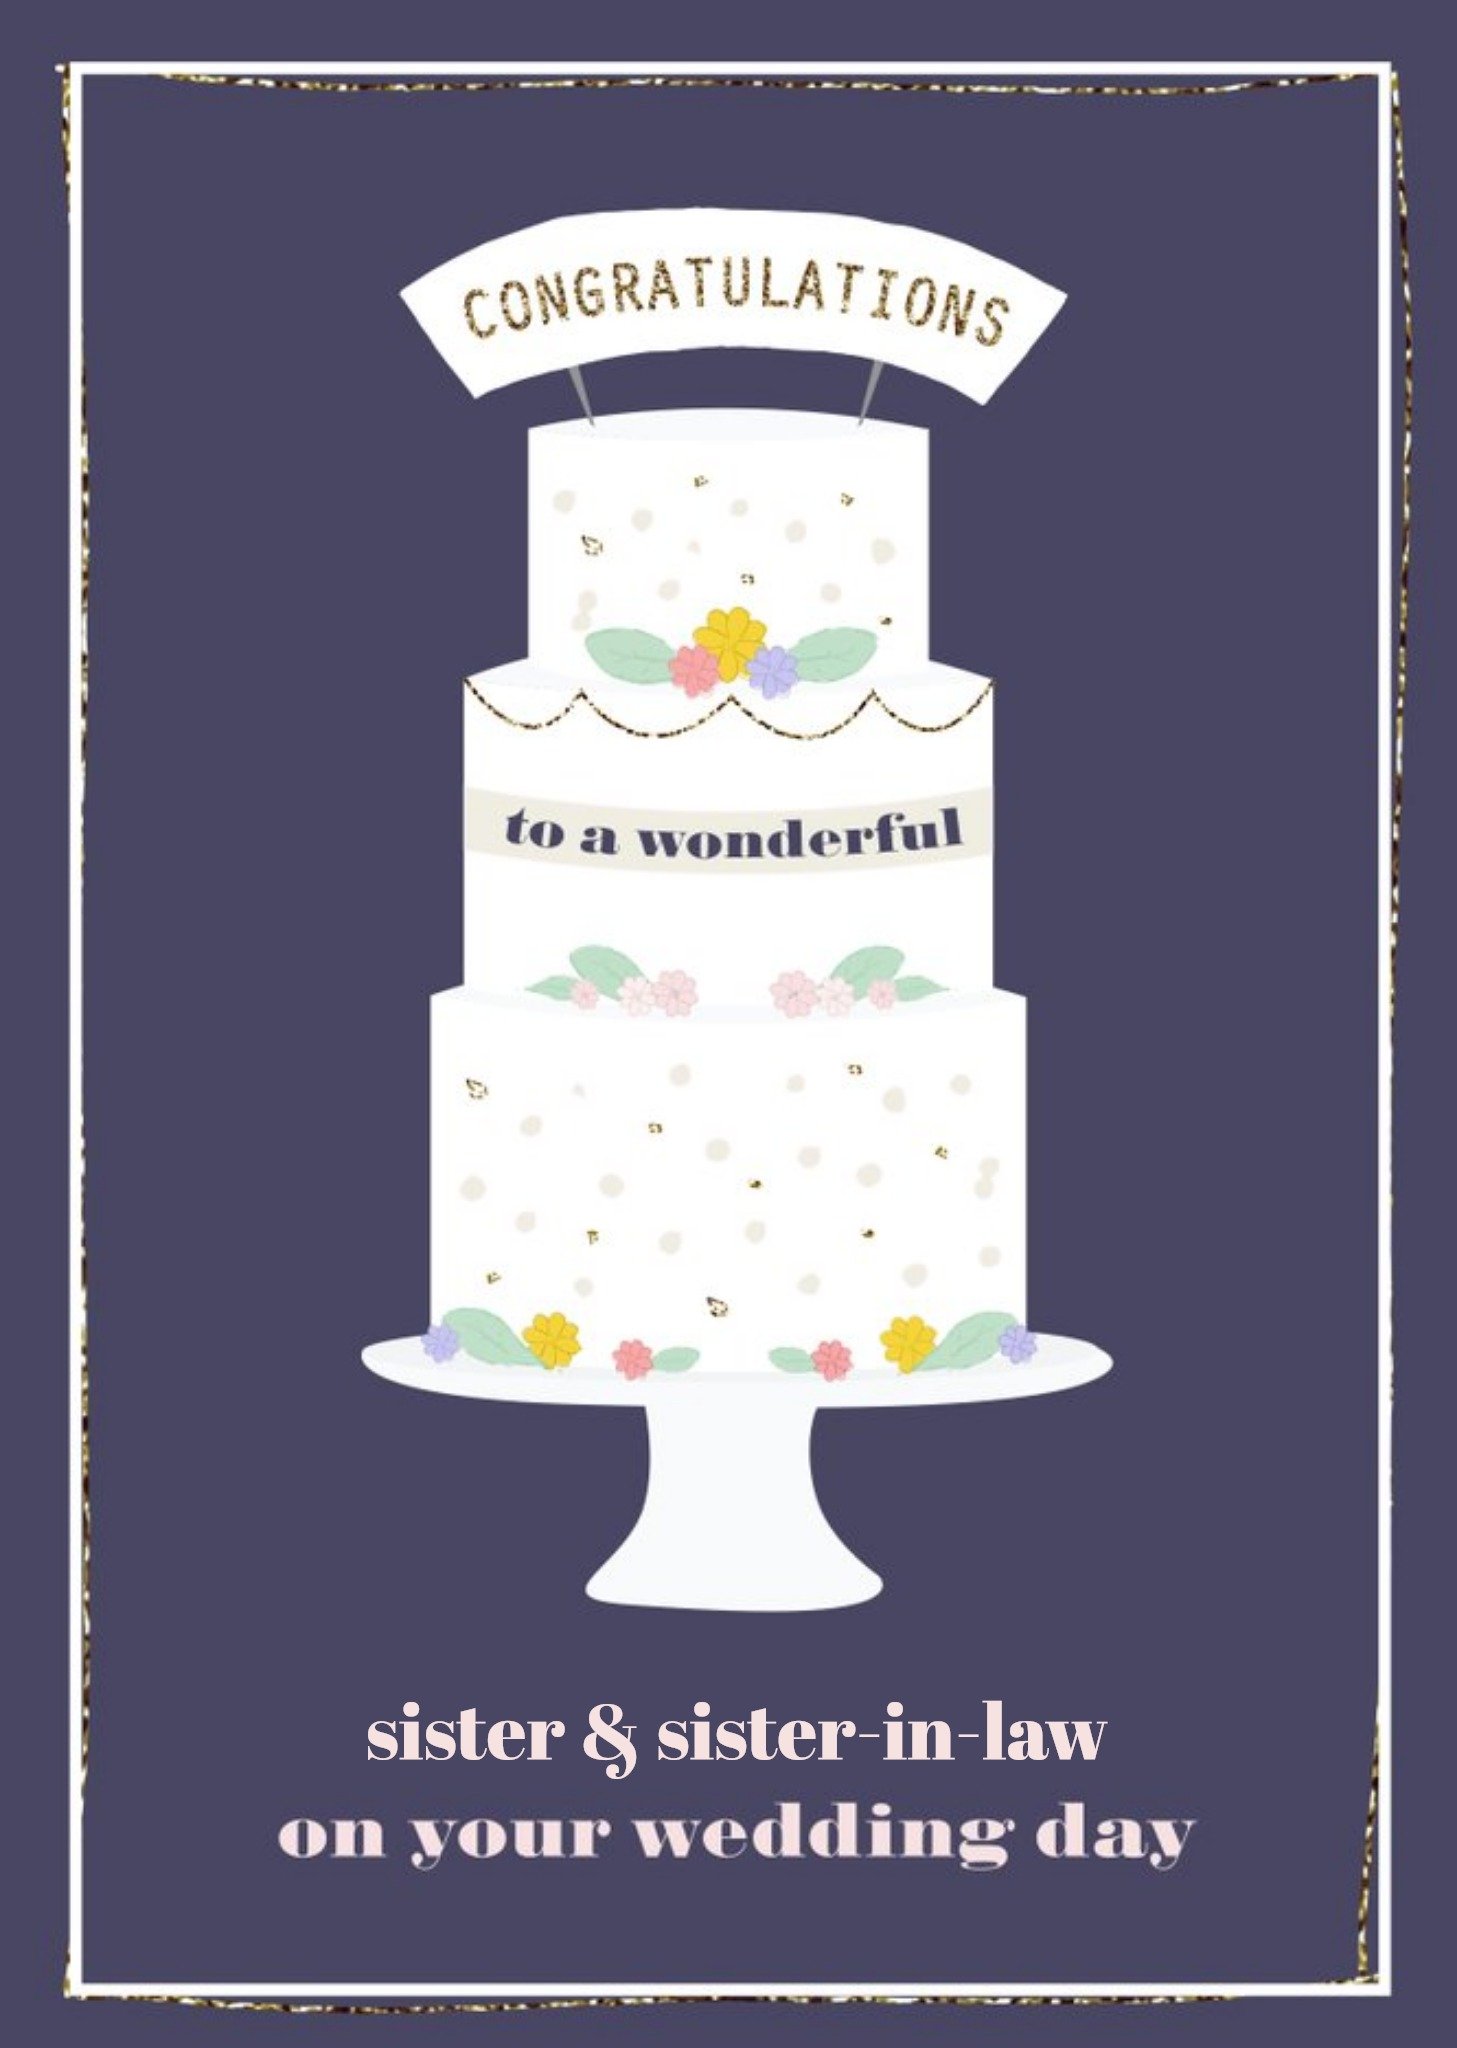 Moonpig Illustrated Wedding Cake Congratulations Sister And Sister In Law On Your Wedding Day Card ,